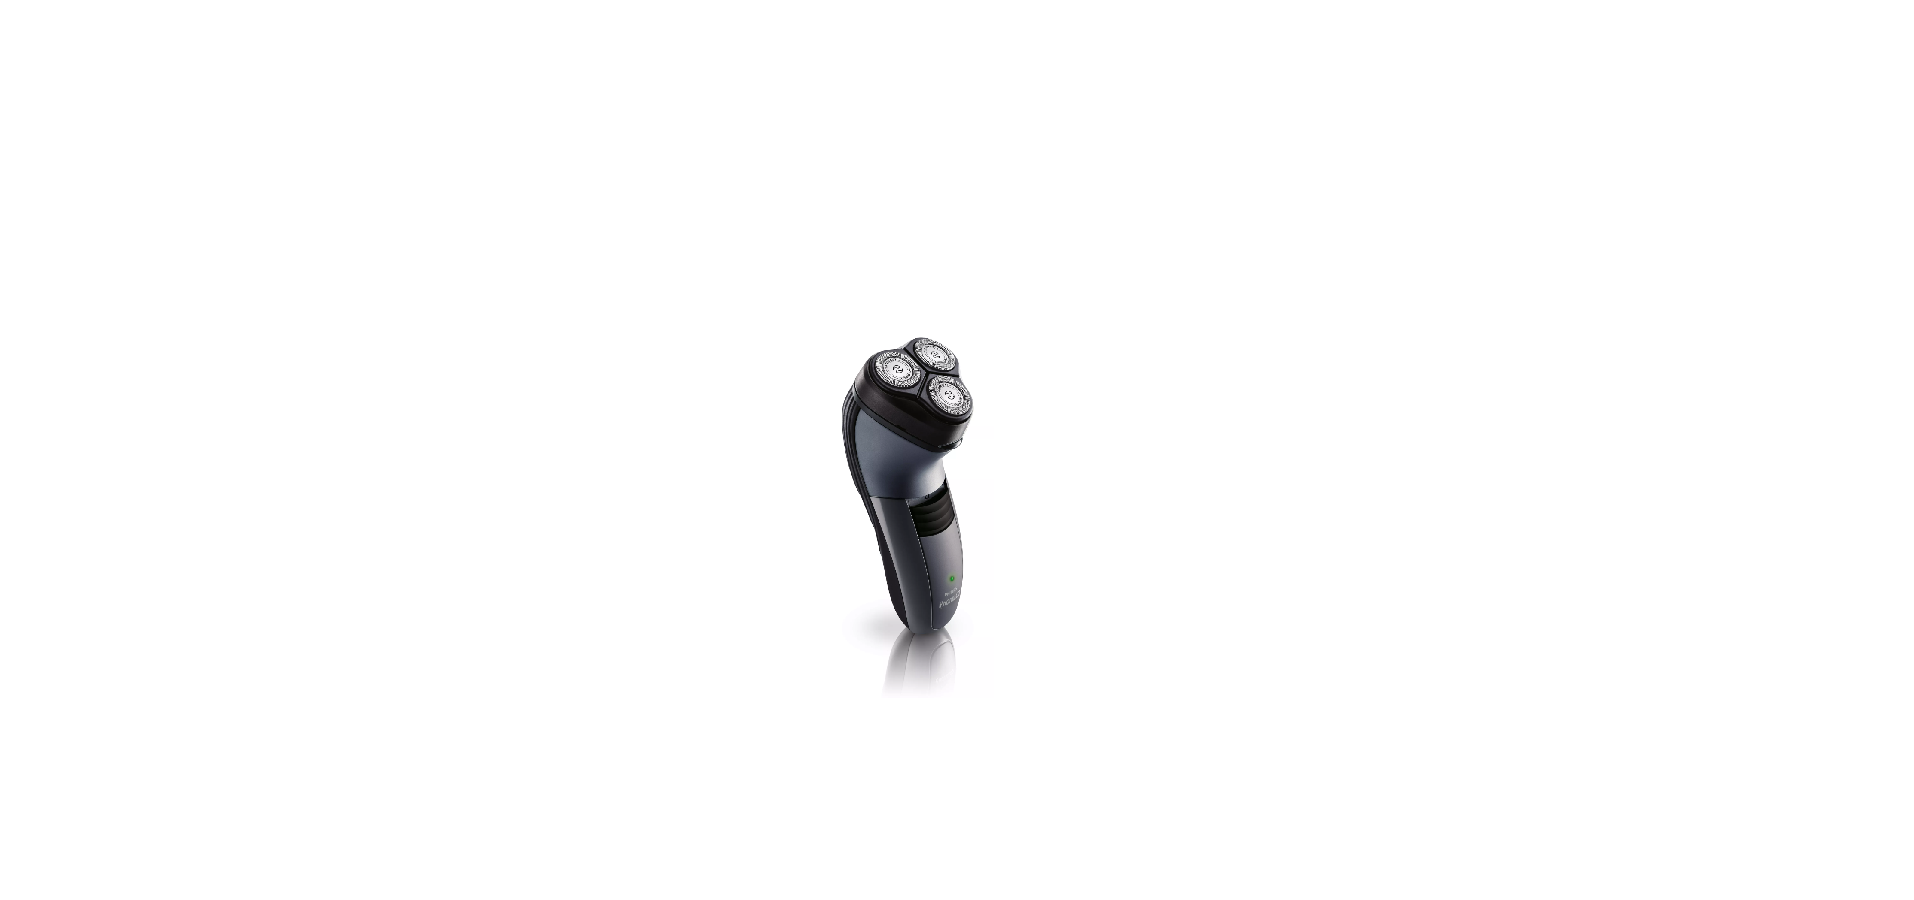 Philips-Norelco-6000-series-Electric-shaver-FEATURE